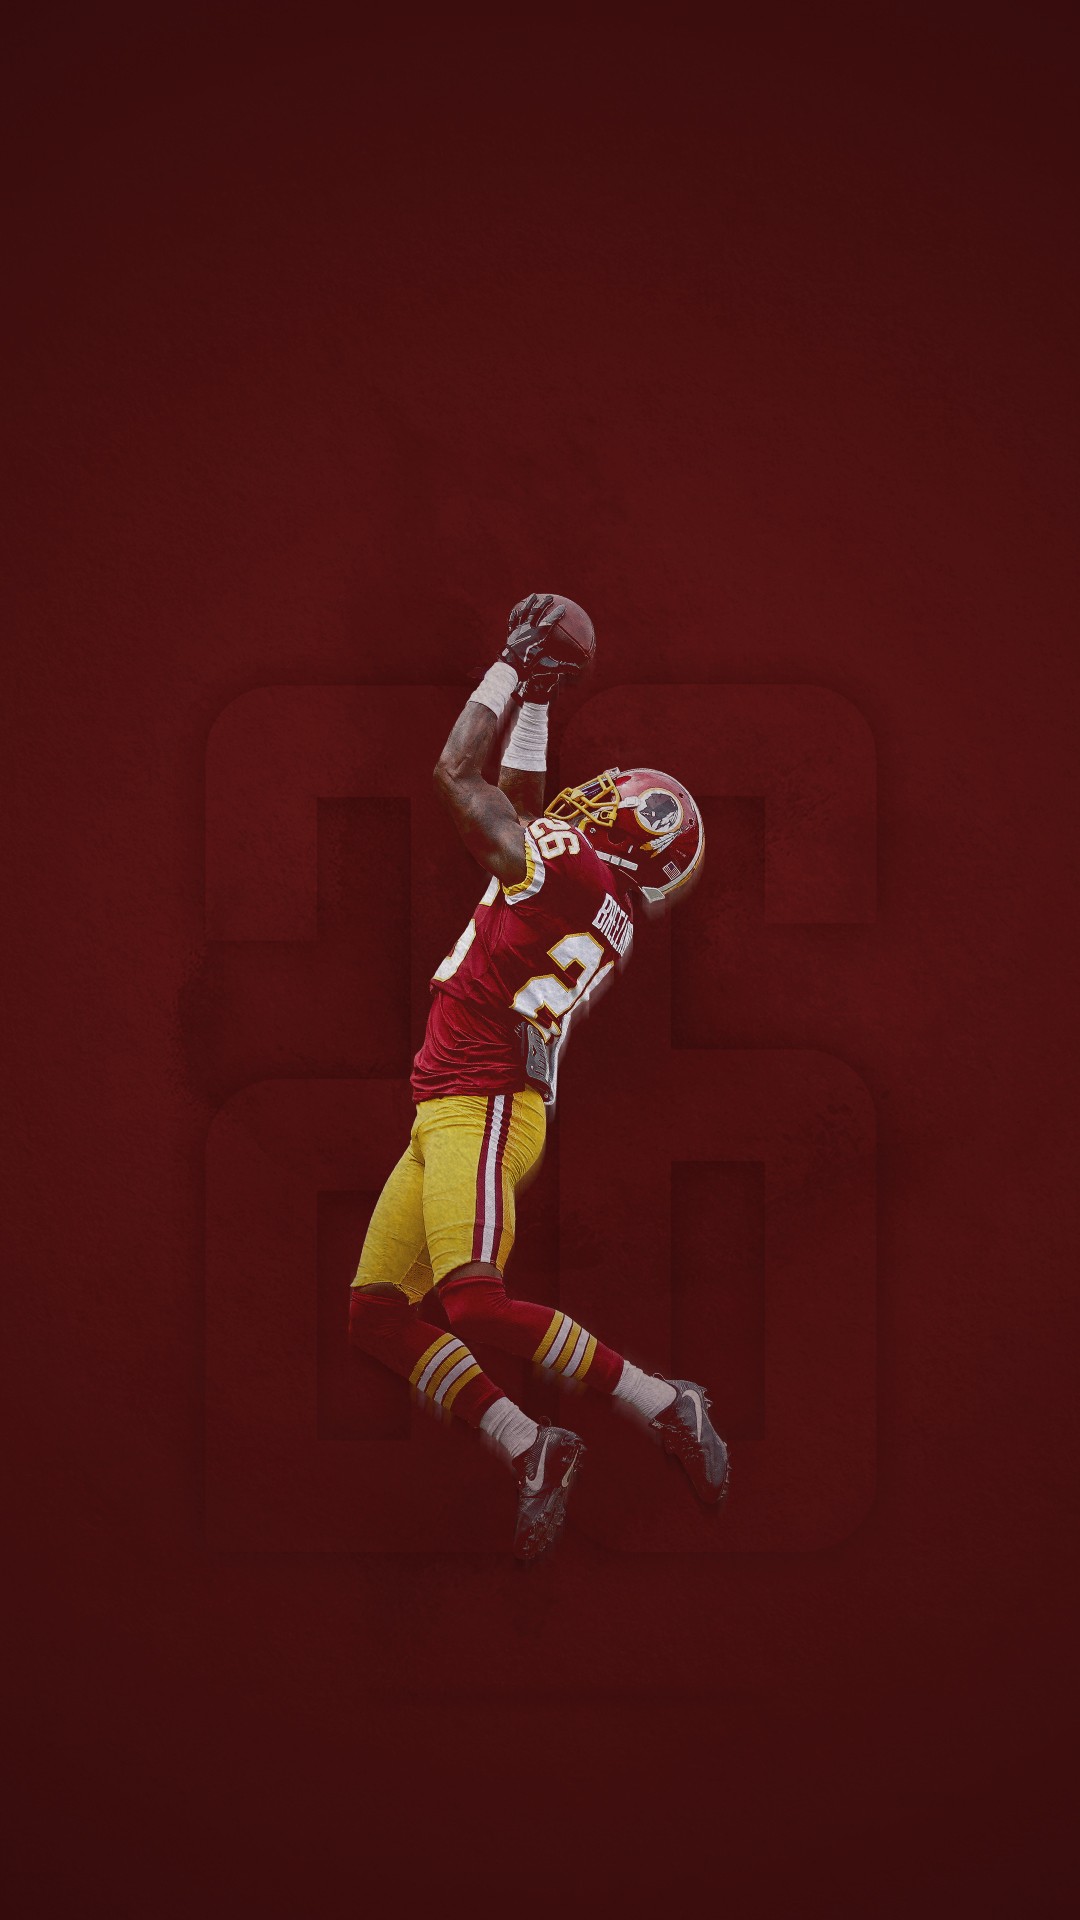 Washington Redskins iPhone Wallpaper High Quality with high-resolution 1080x1920 pixel. Donwload and set as wallpaper for your iPhone X, iPhone XS home screen backgrounds, XS Max, XR, iPhone8 lock screen wallpaper, iPhone 7, 6, SE and other mobile devices